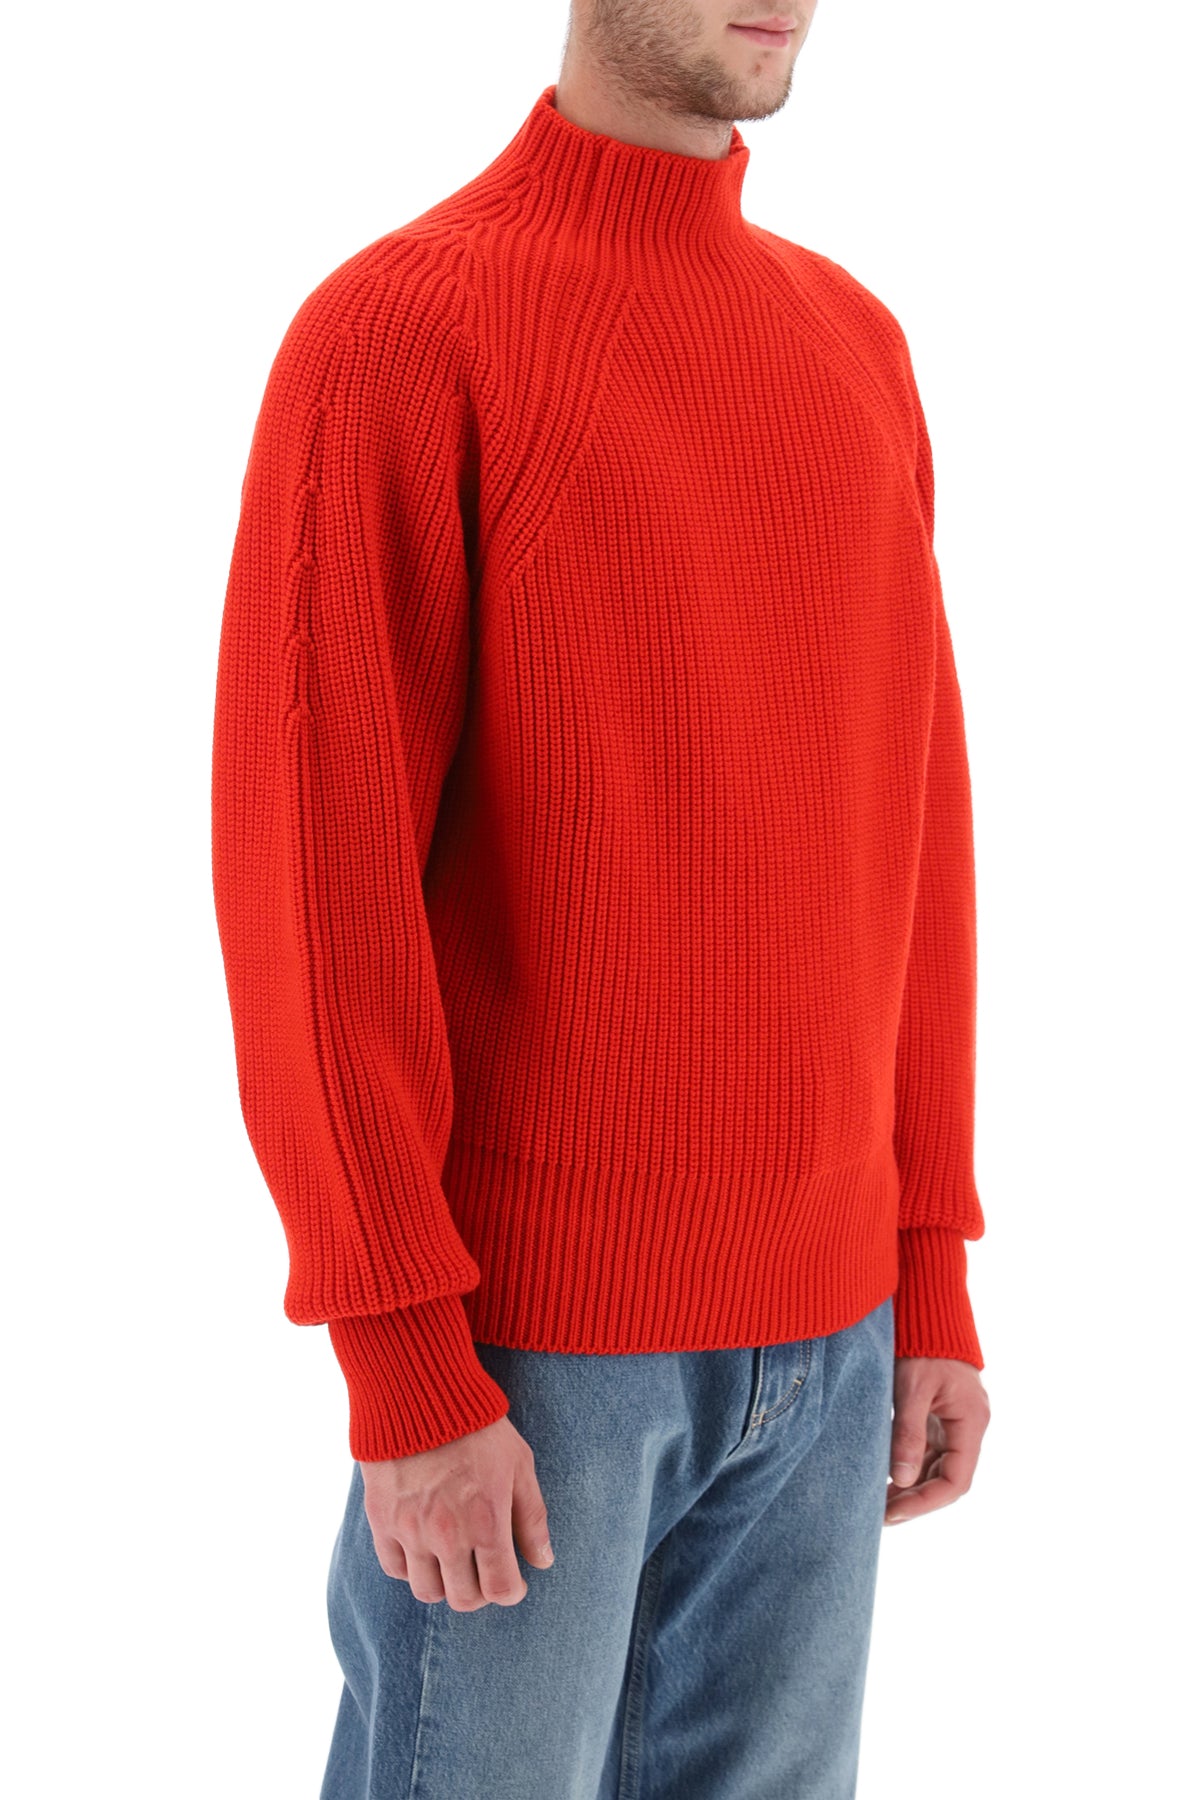 Shop Ferragamo Men's Funnel-neck Ribbed Wool Sweater In Red For Fw23 Collection